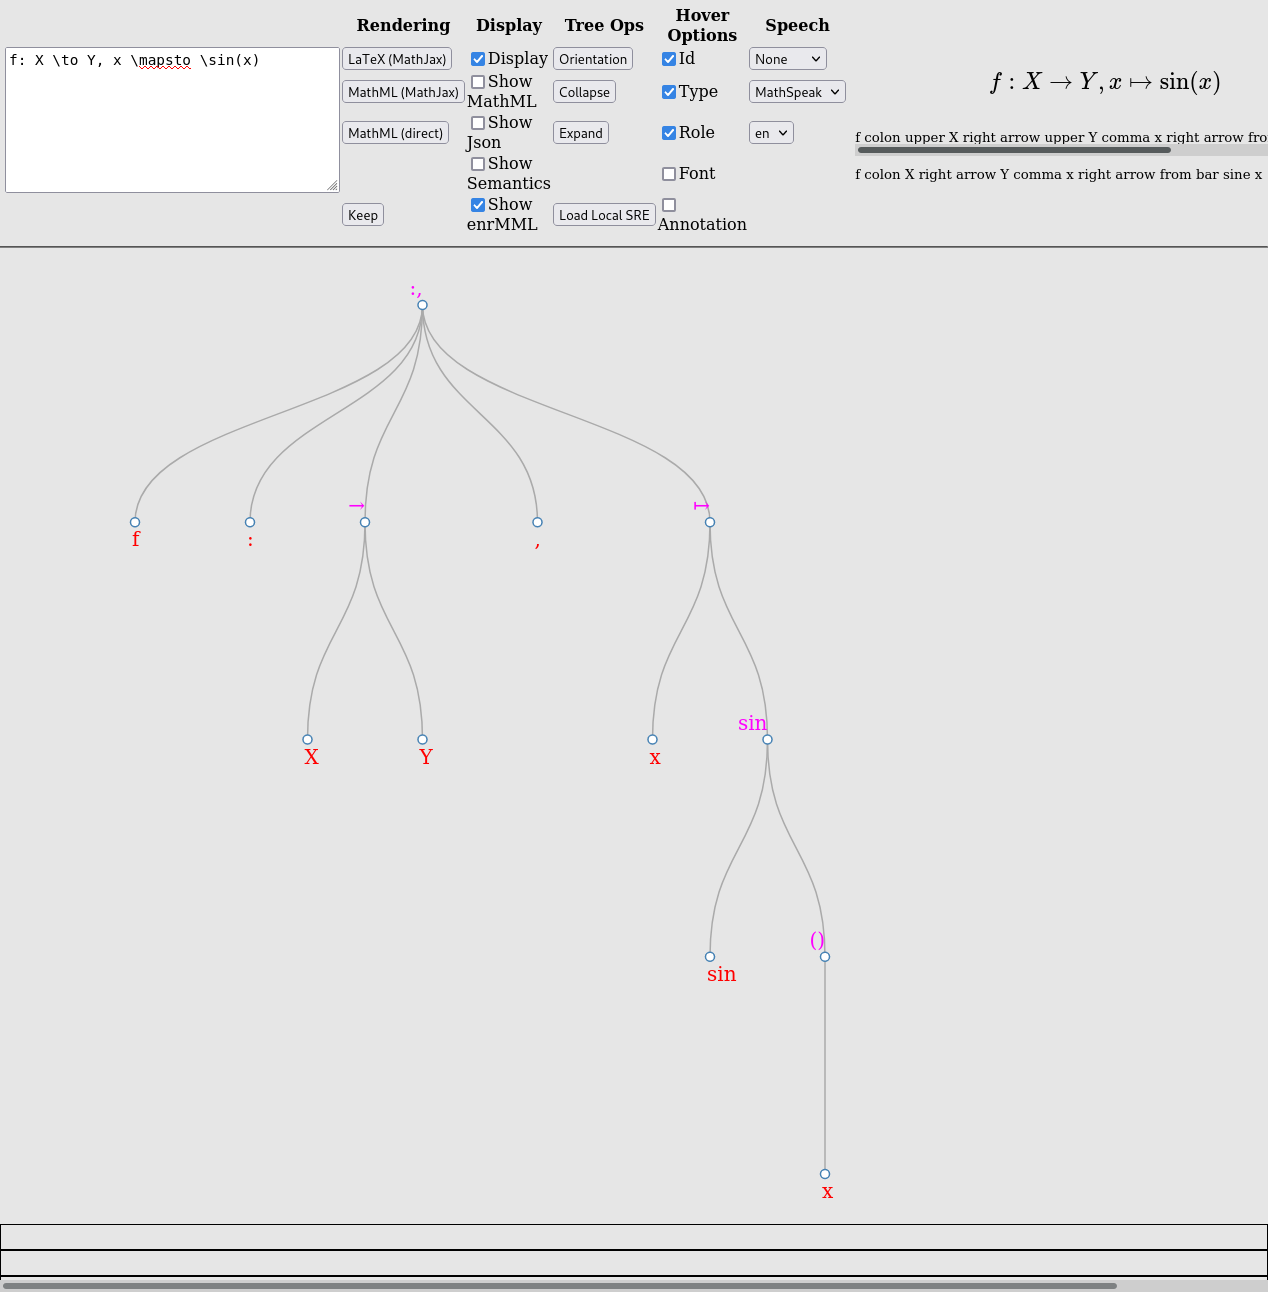 screenshot from the above webpage, showing various UI options and the resulting semantic tree for a simple function declaration for sine of x